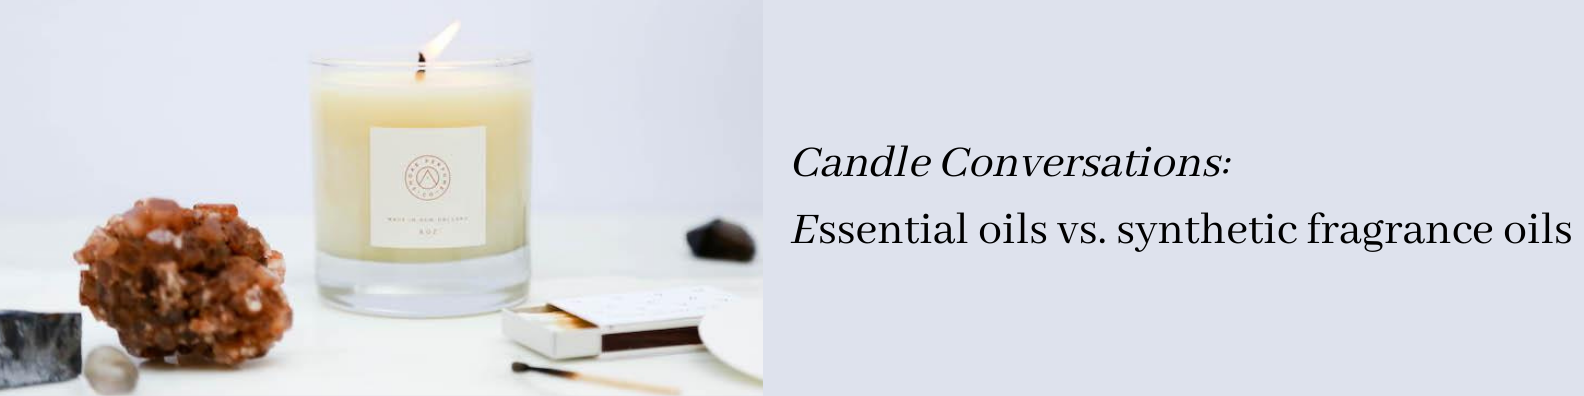 Candle chat--essential oils vs. synthetic fragrance oils!